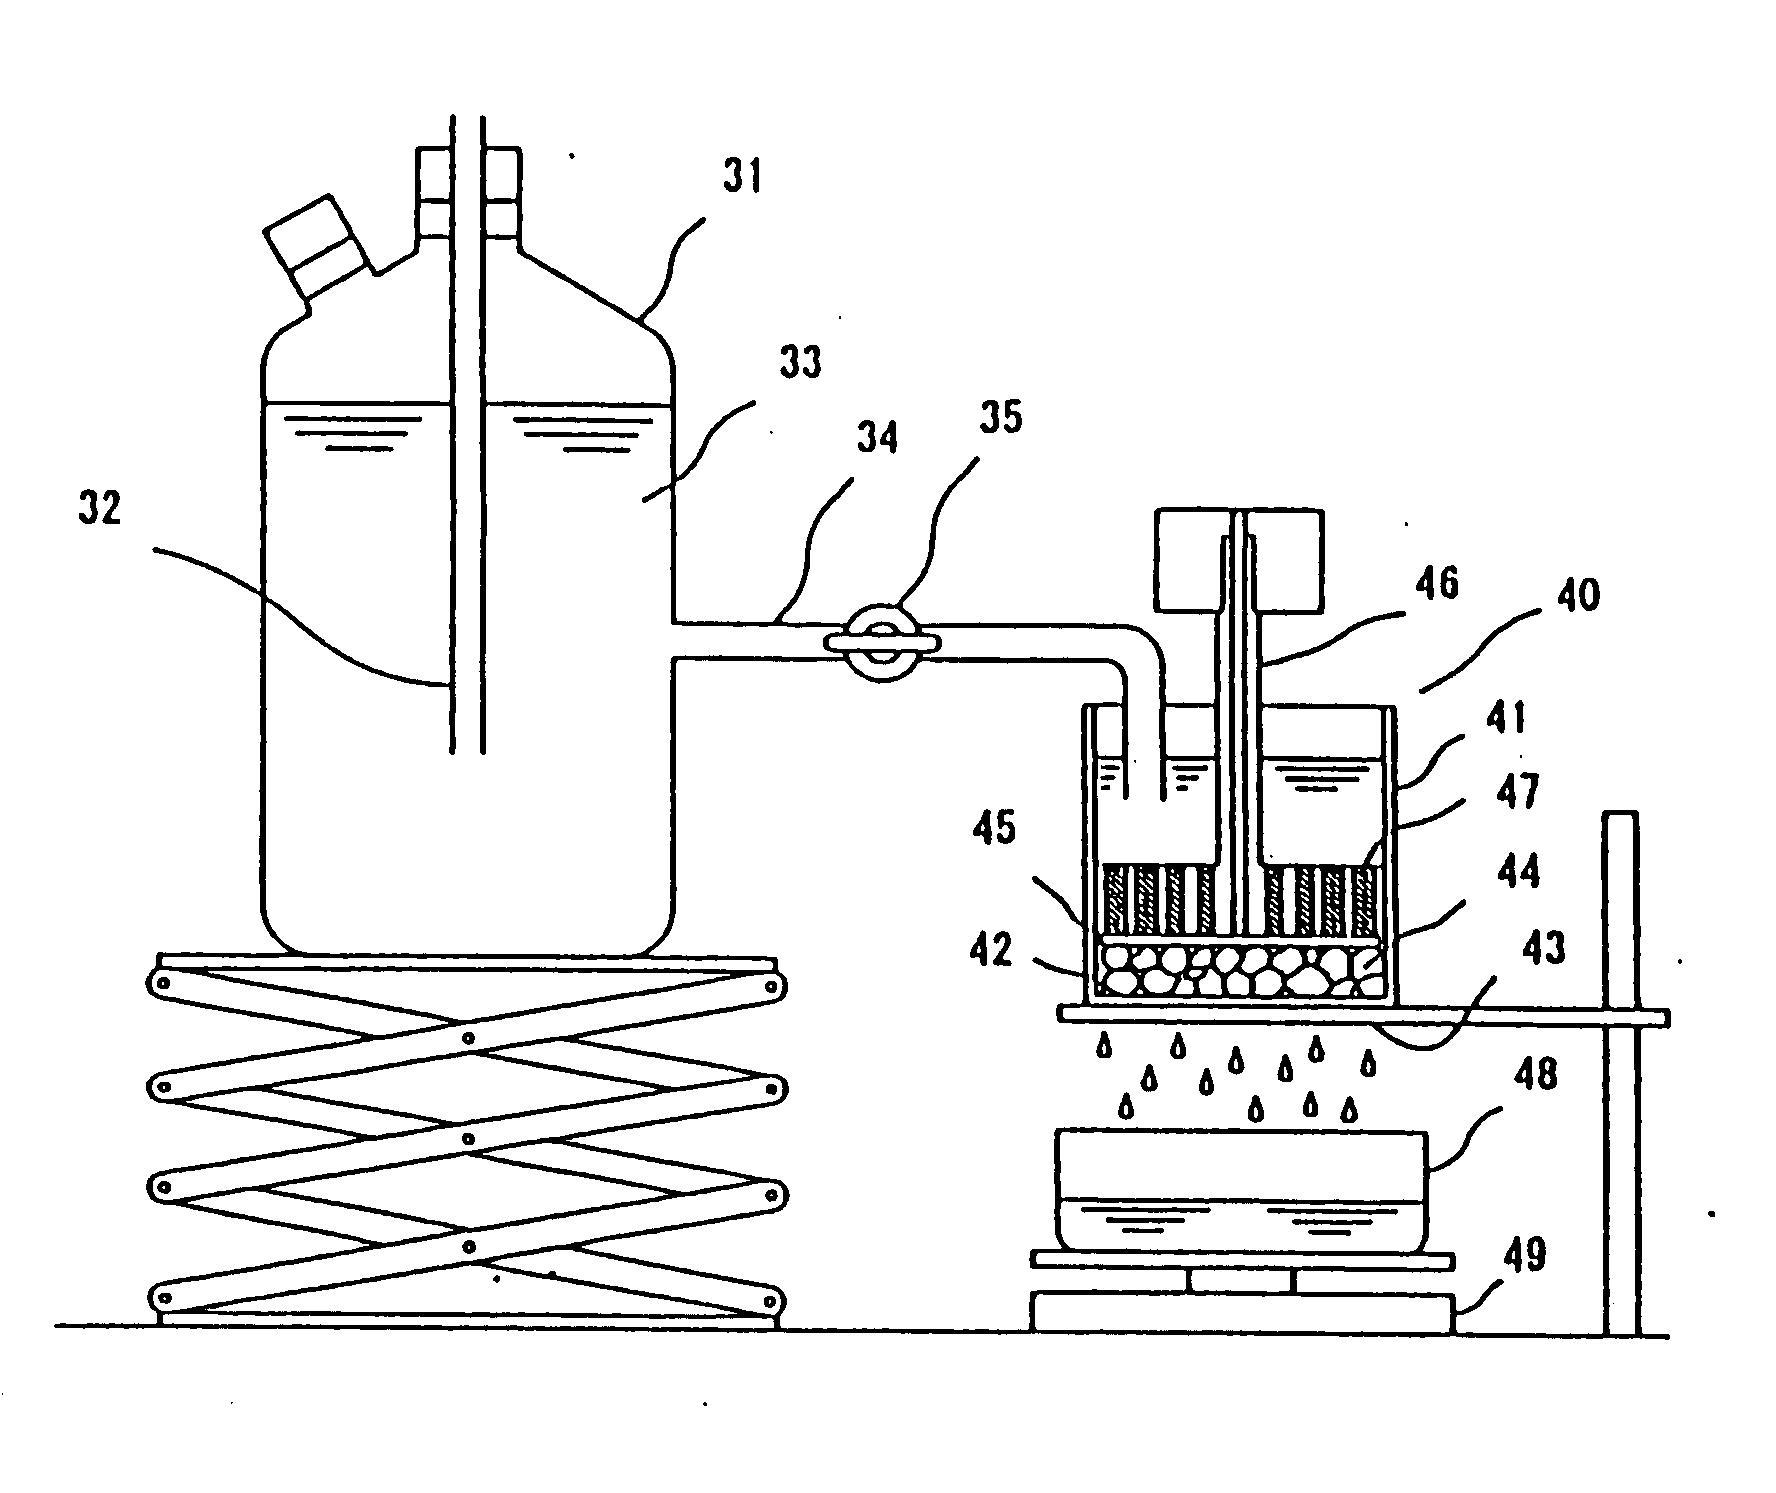 Water-absorbent resin having treated surface and process for producing the same